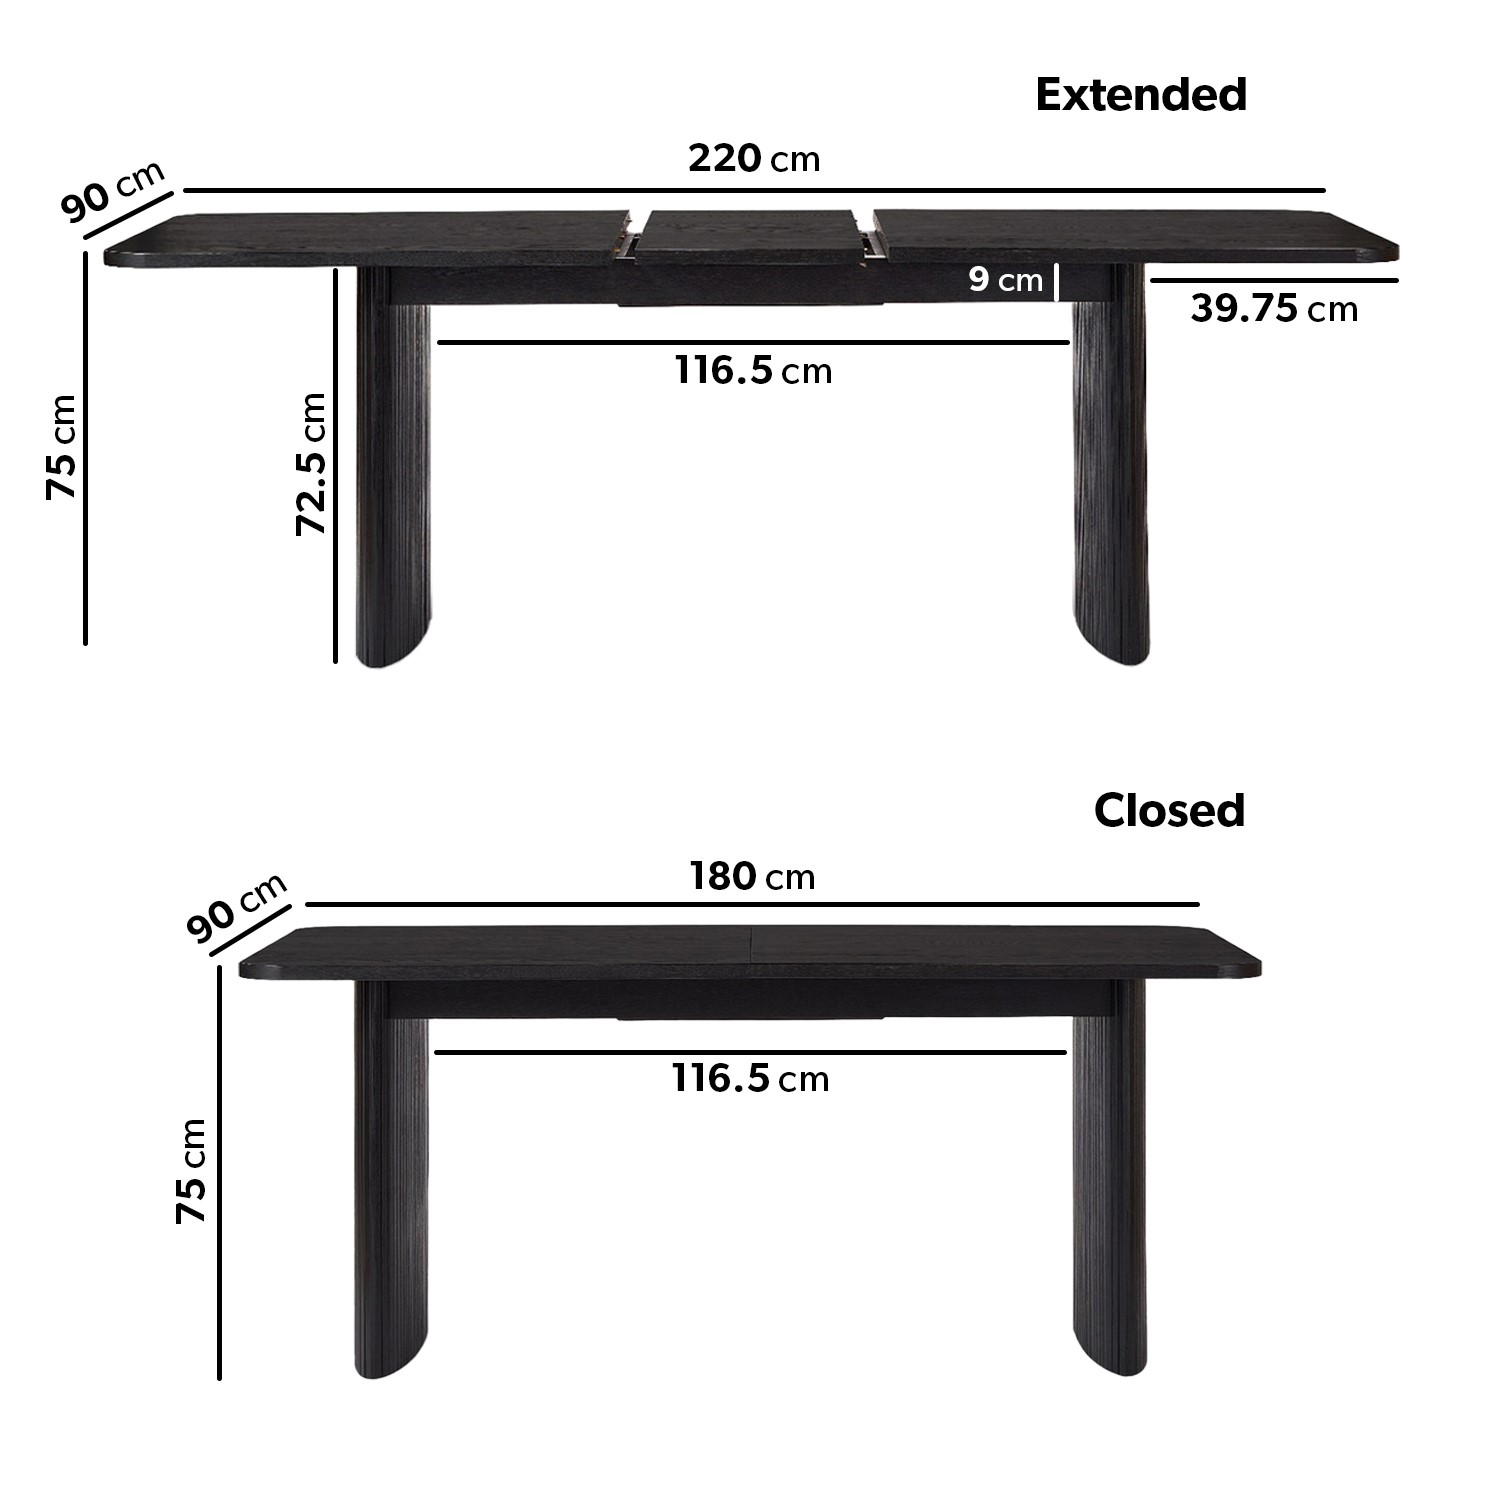 Read more about Large black oak extendable dining table seats 6-8 jarel